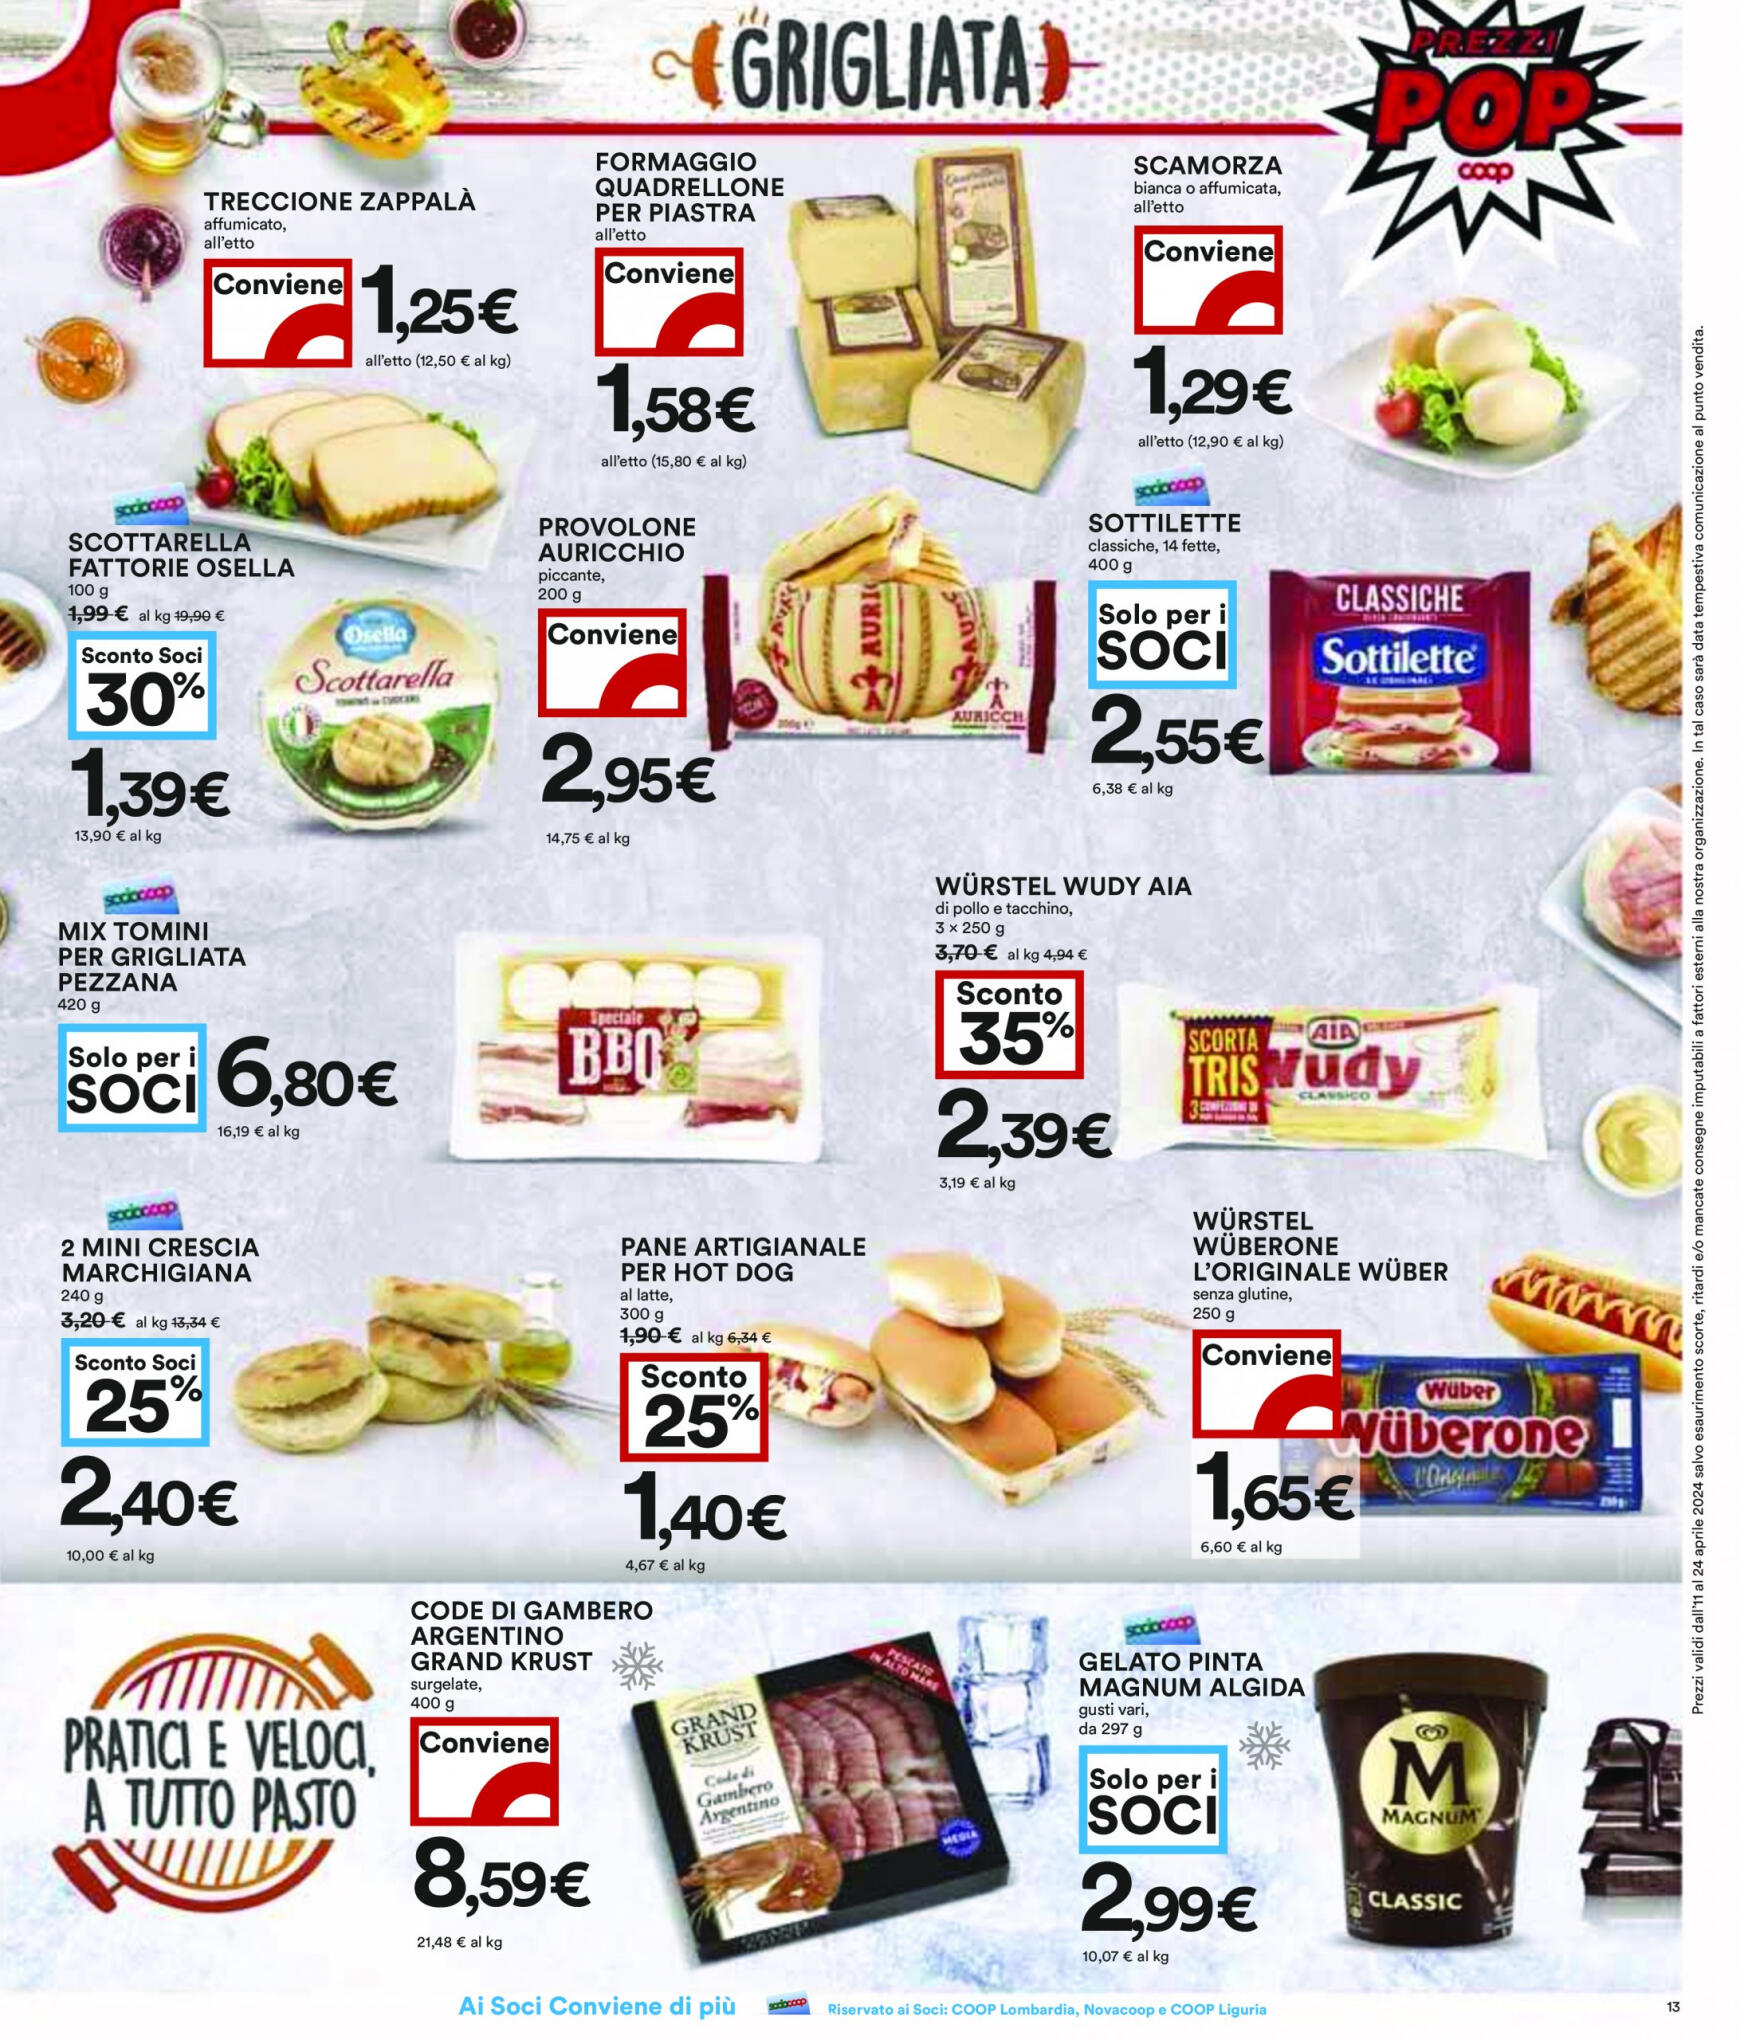 coop - Nuovo volantino Coop 11.04. - 24.04. - page: 13